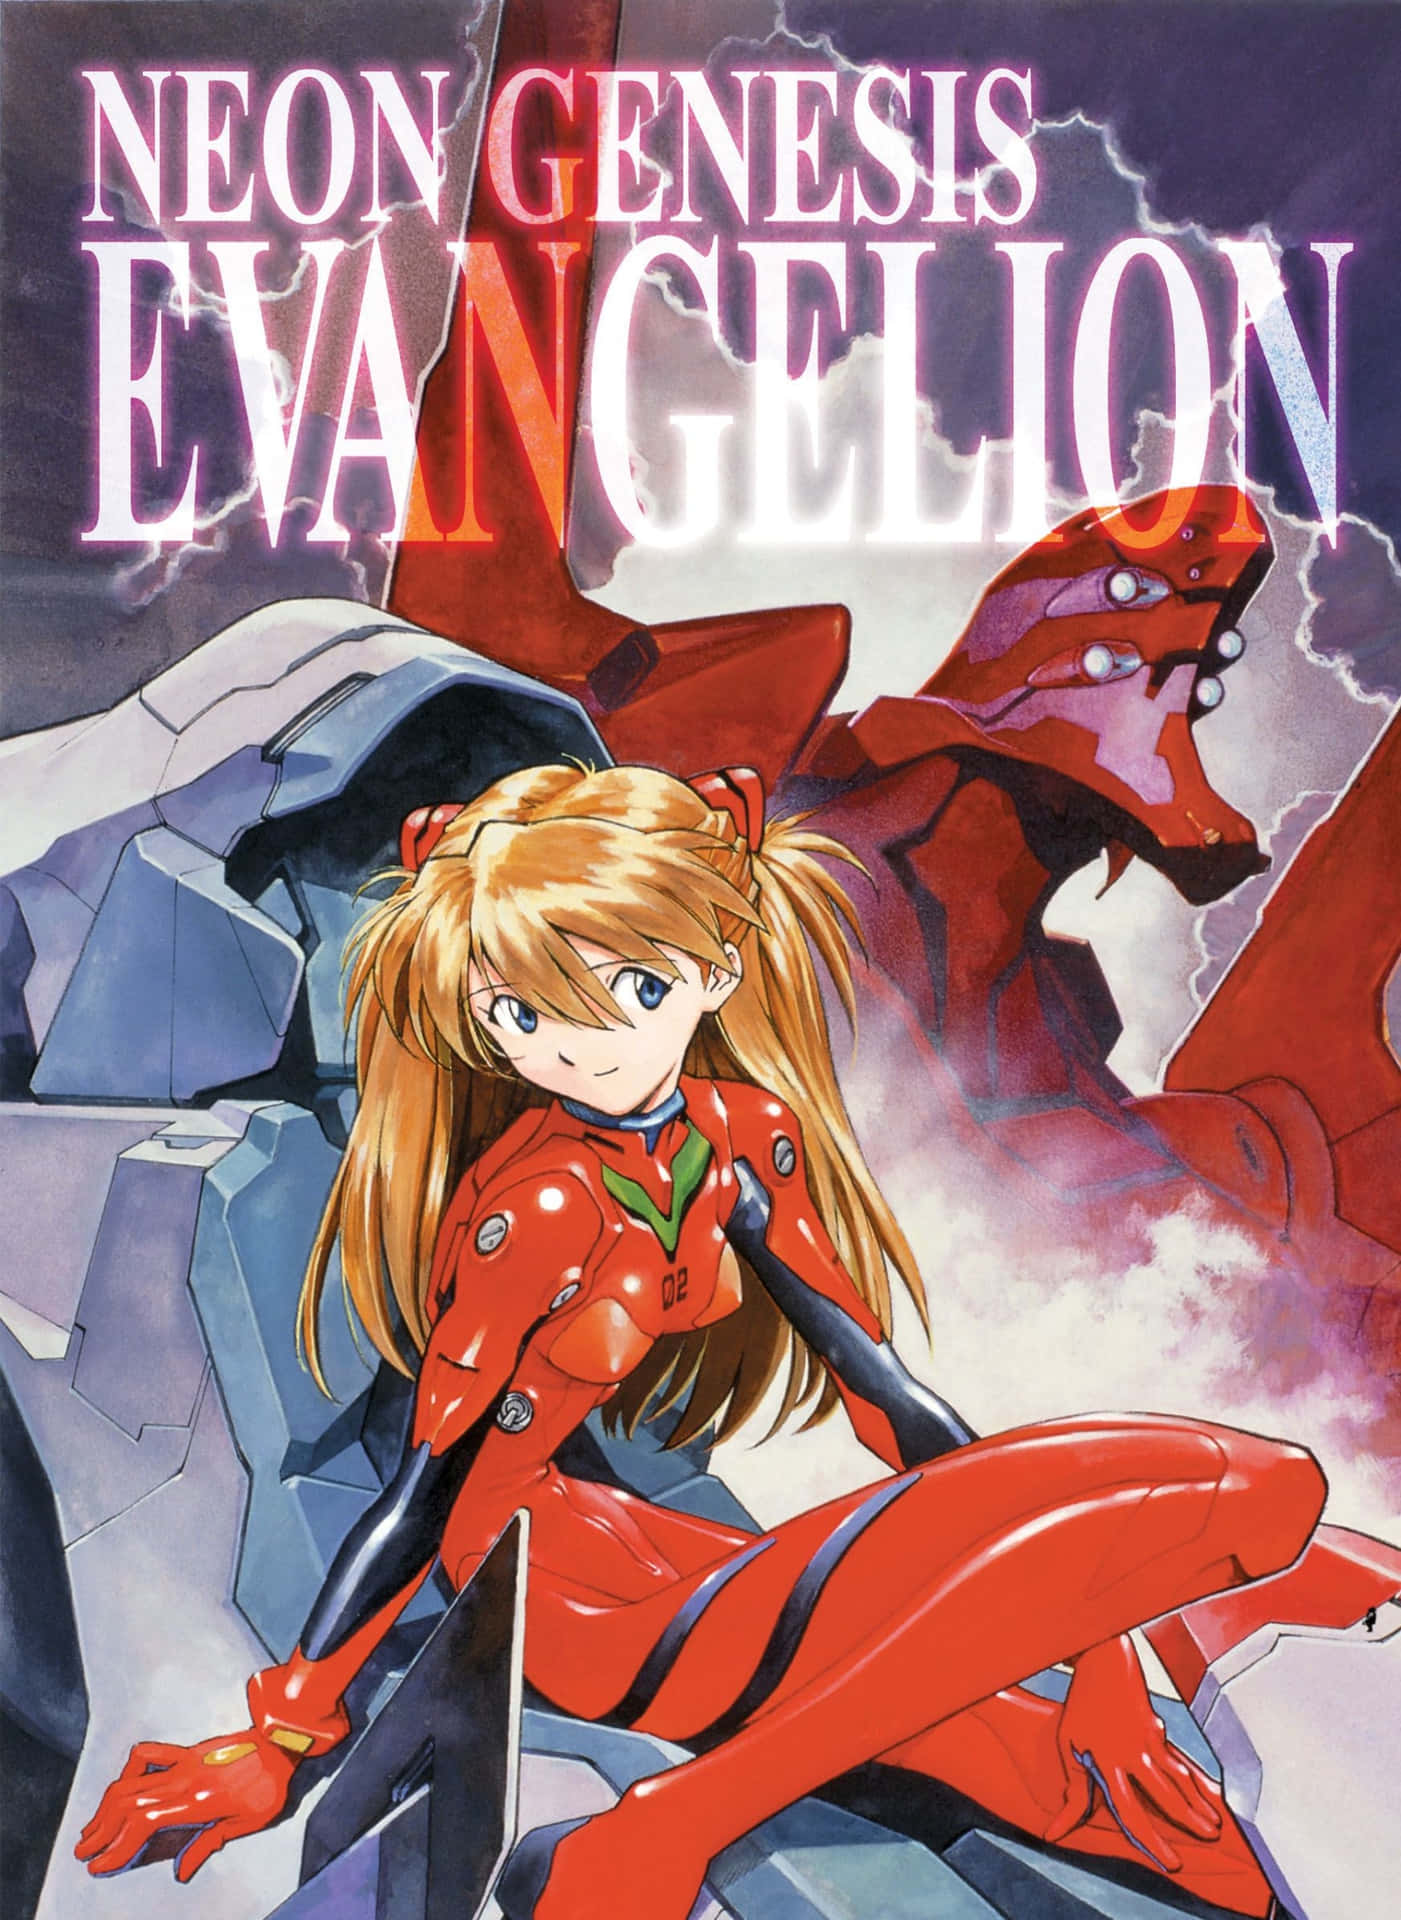 Uniting Humanity - The Heroes of Evangelion